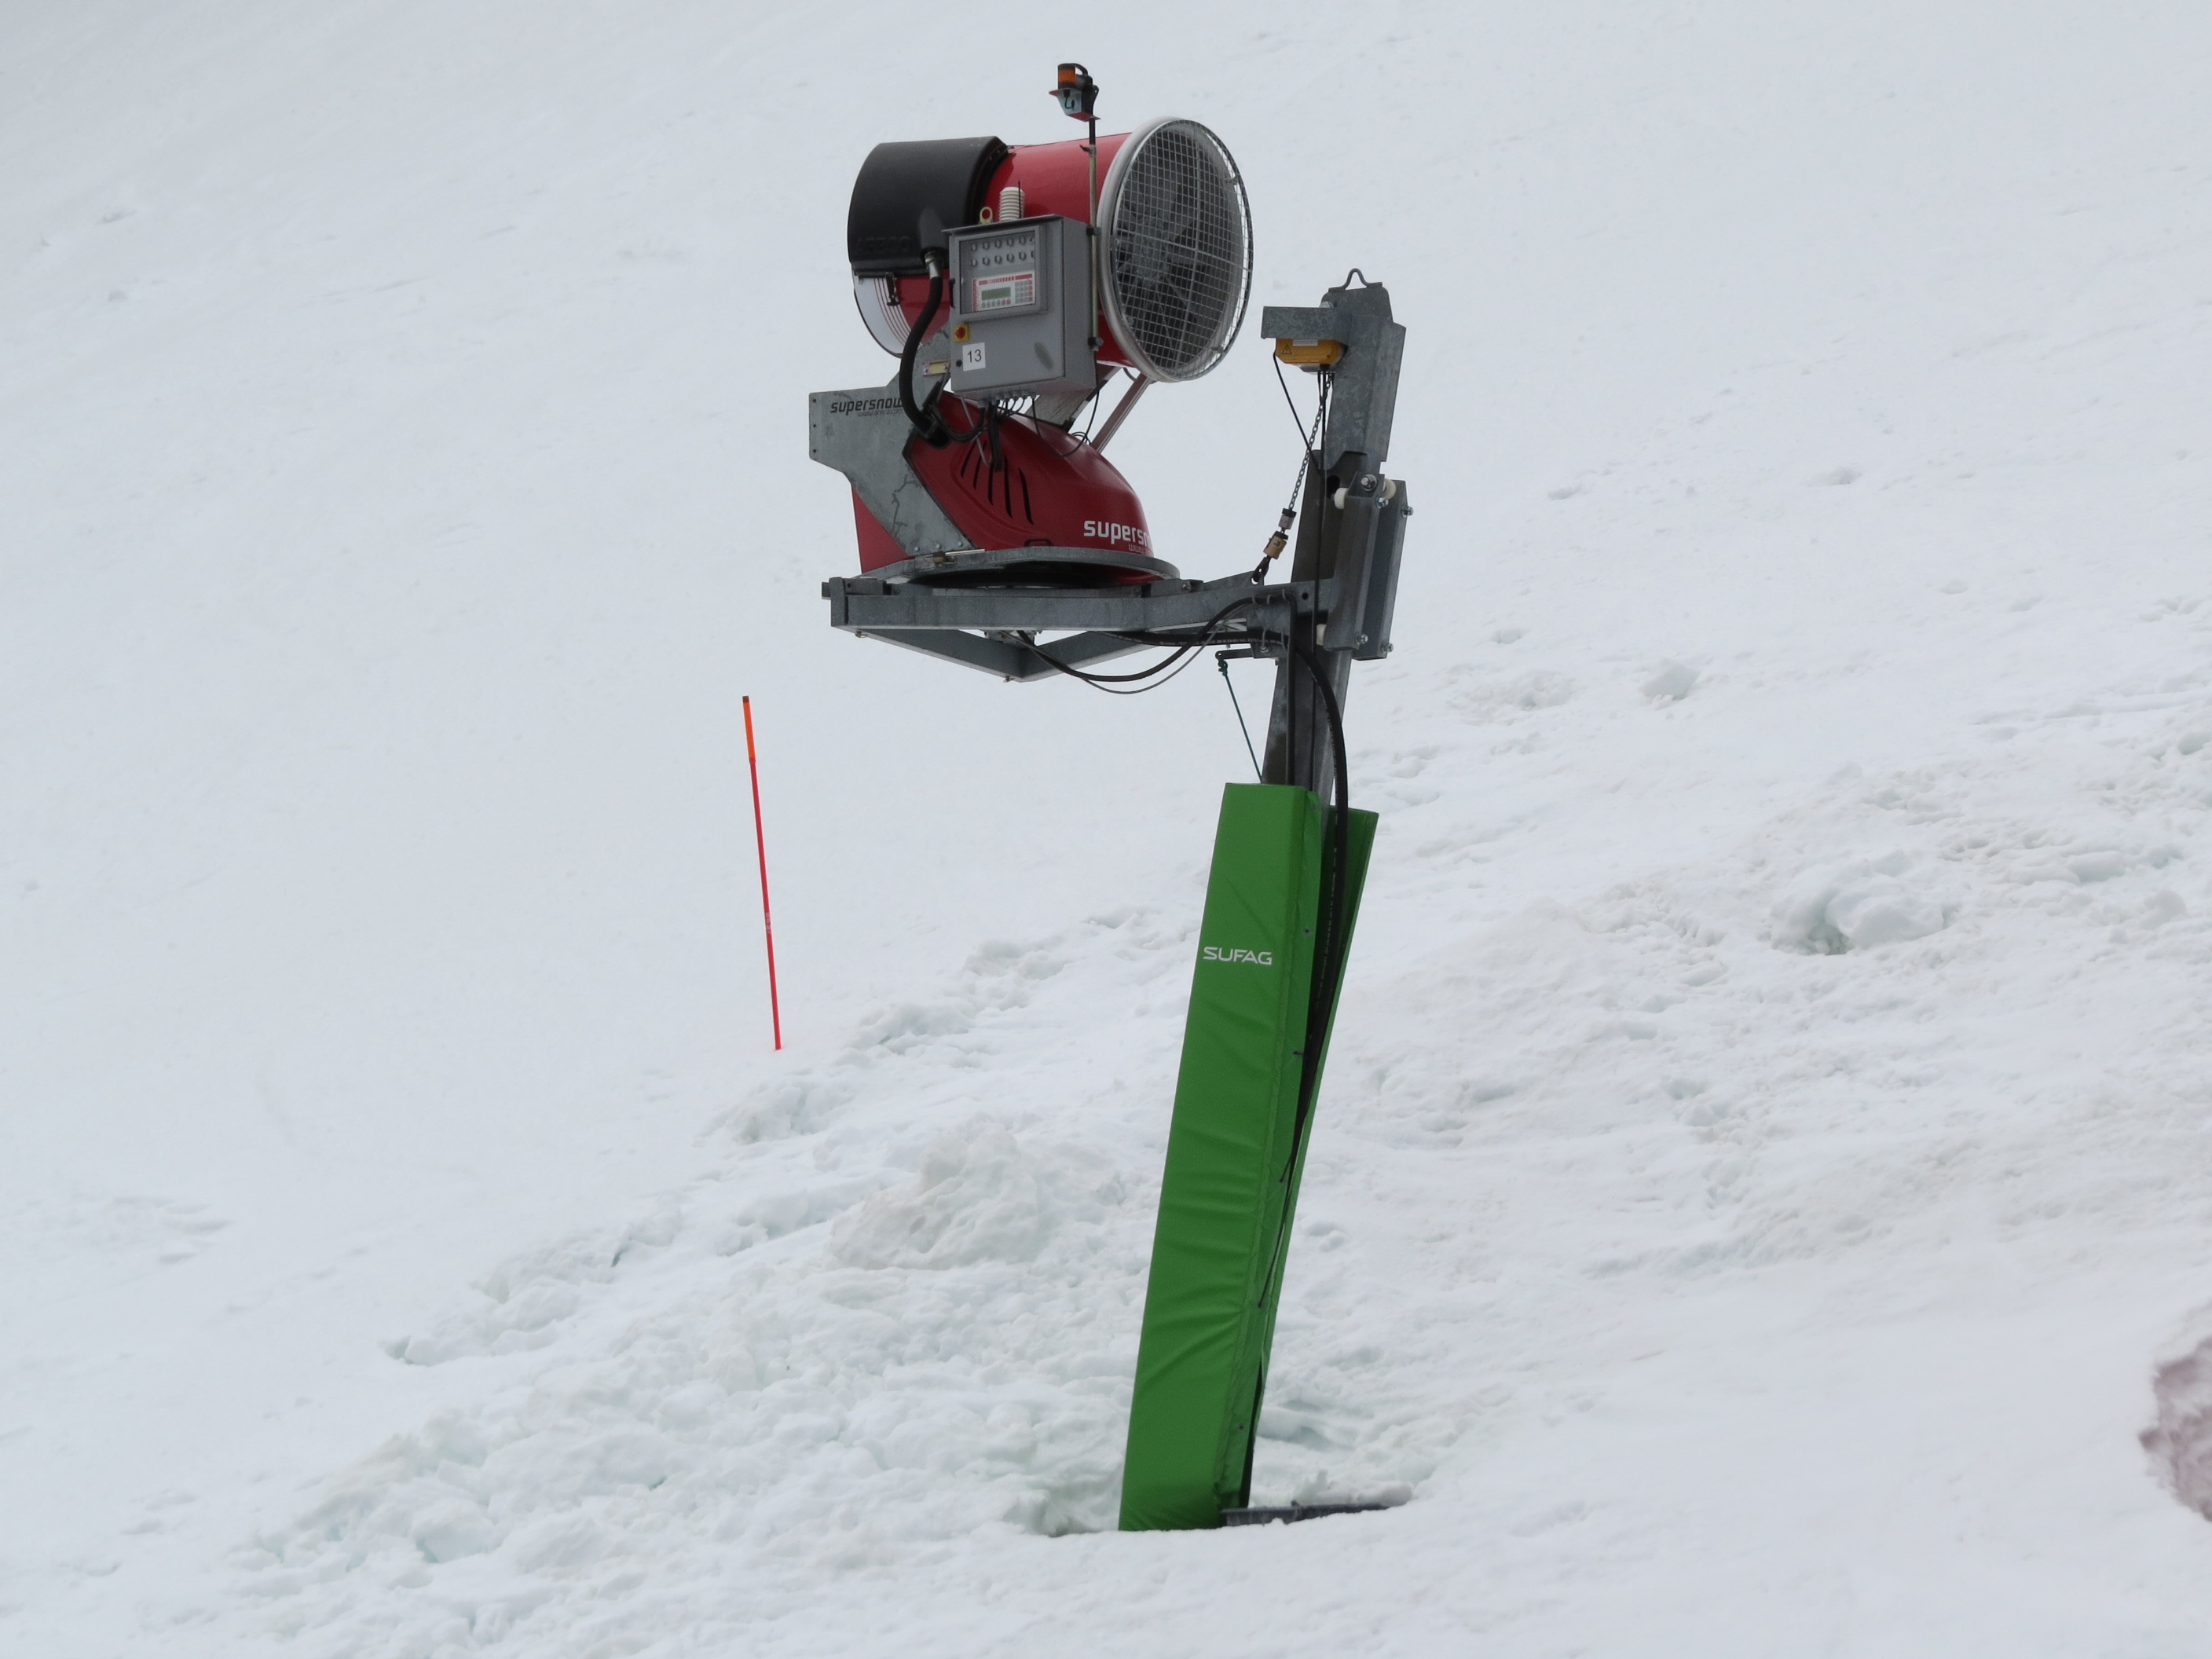 2018-01-01 (156) Supersnow snow cannon in Annaberg, Lower Austria